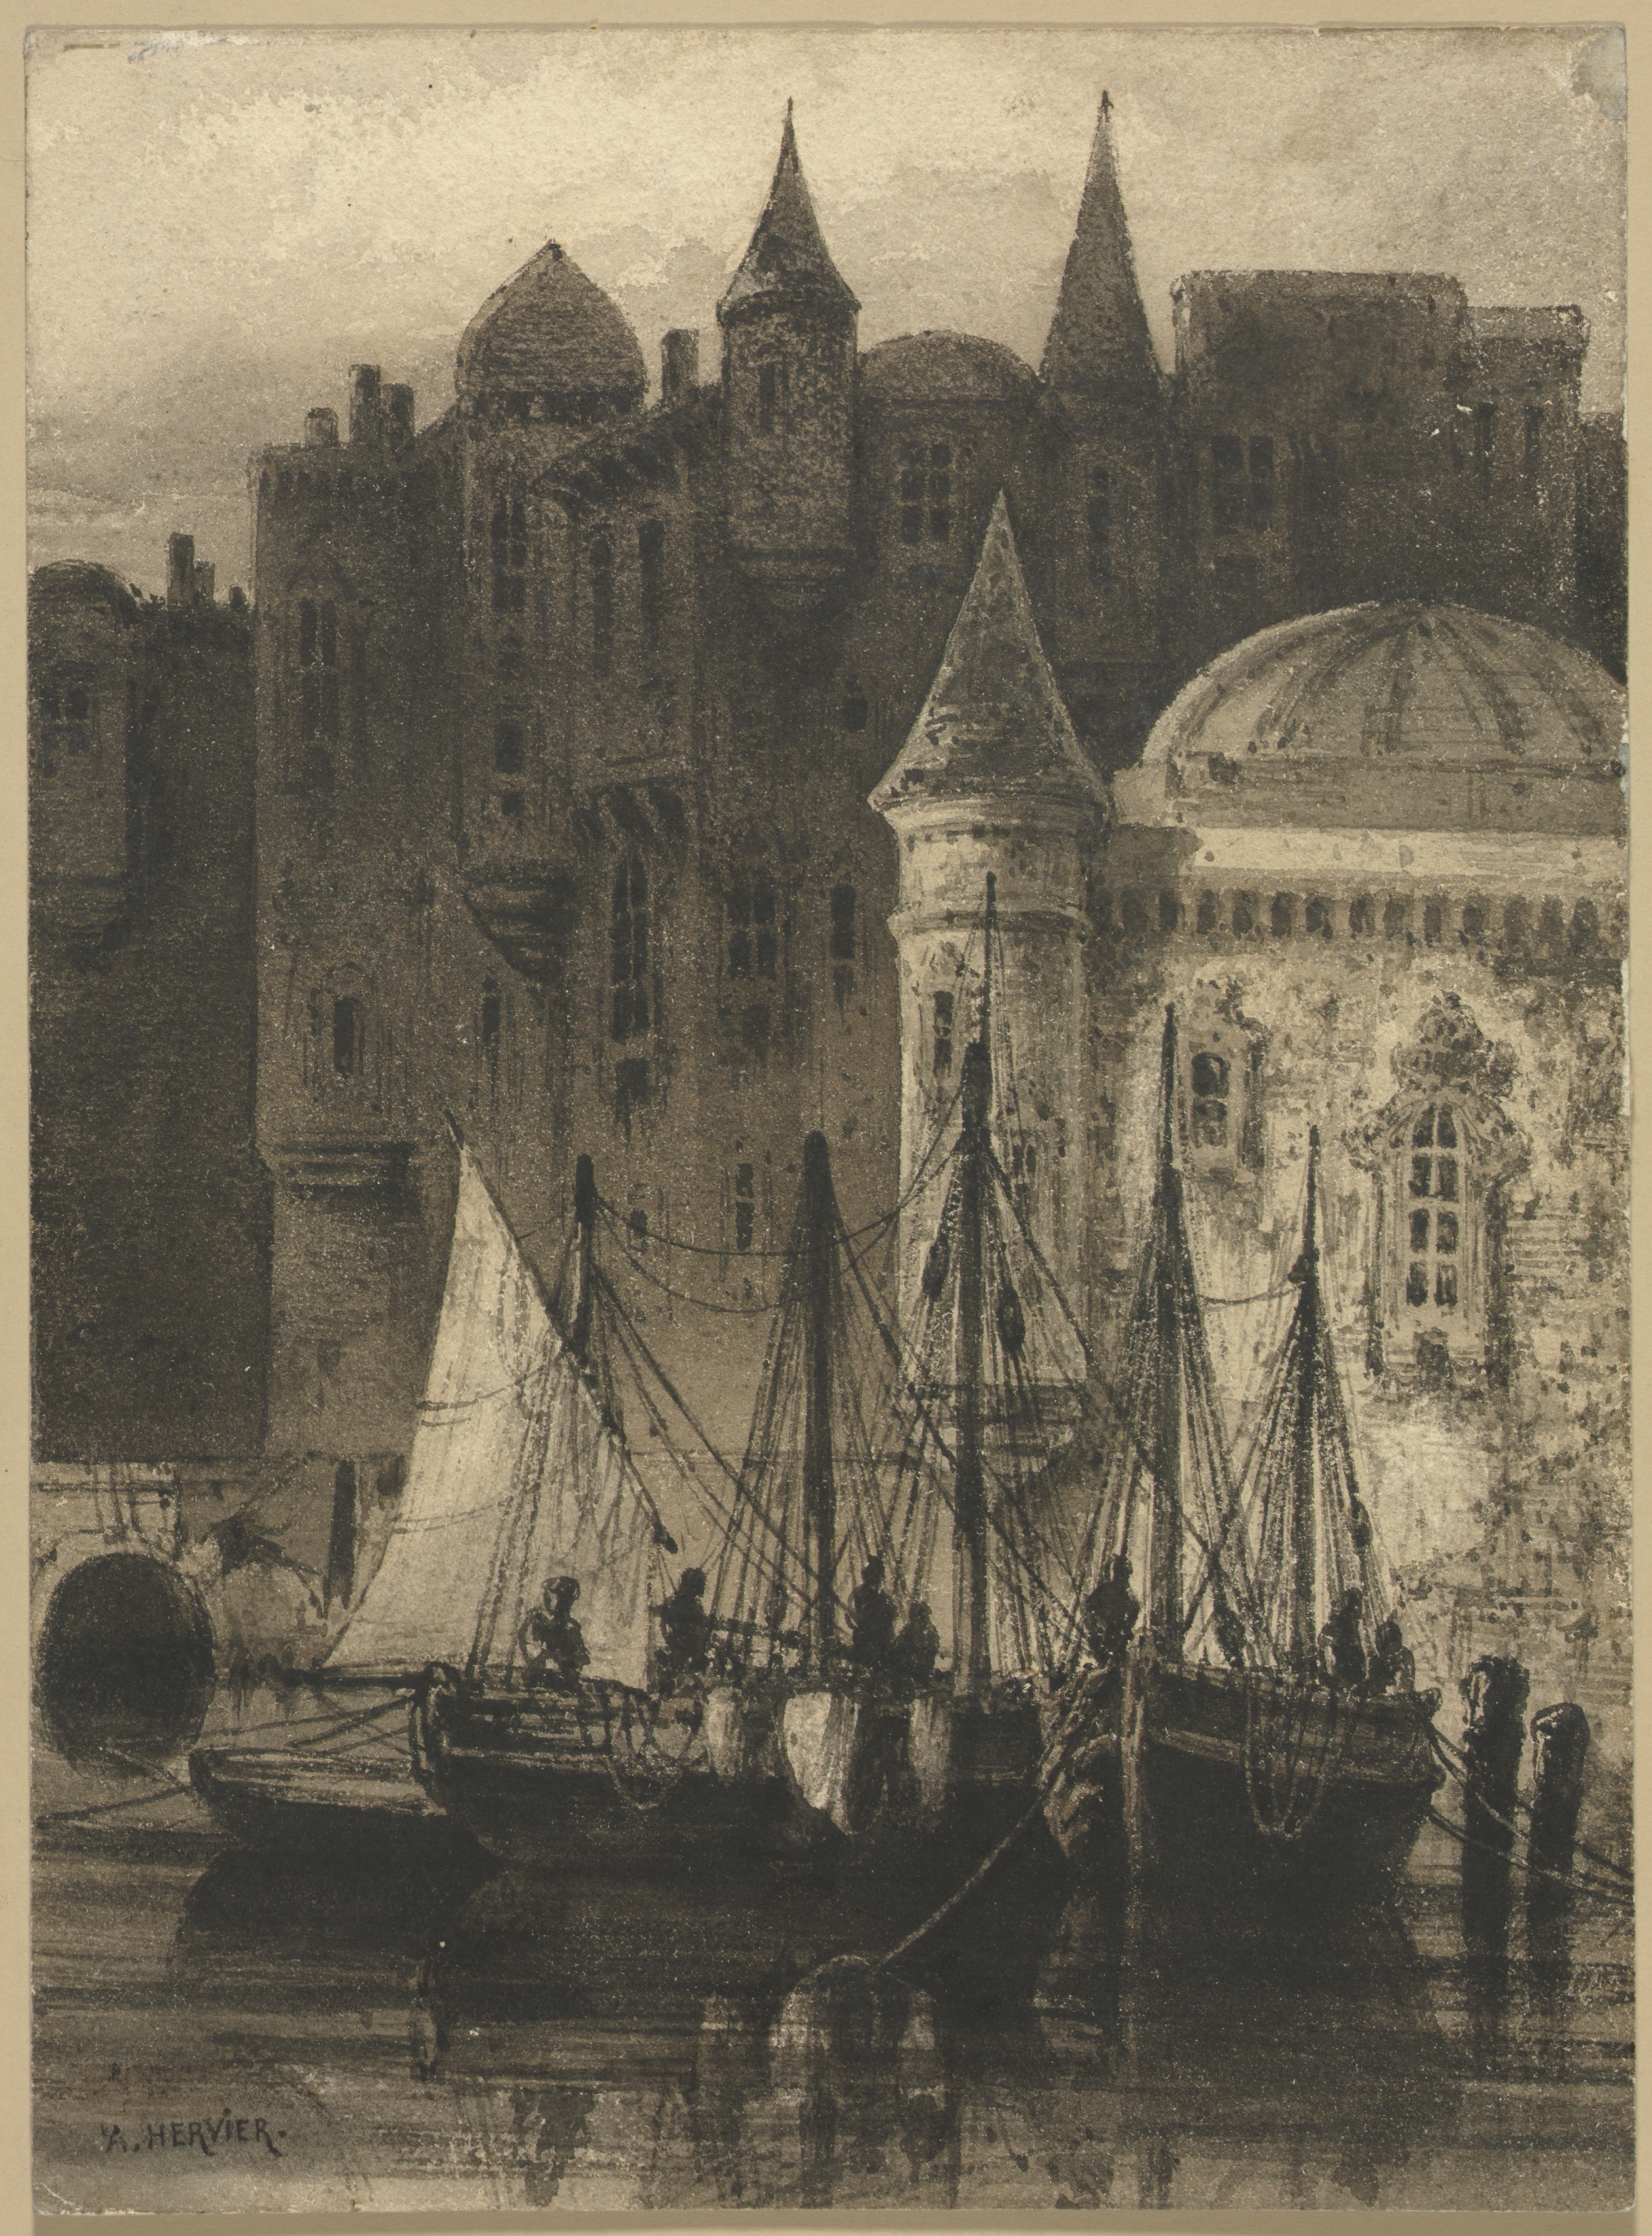 Harbor Scene with Boats and Castle